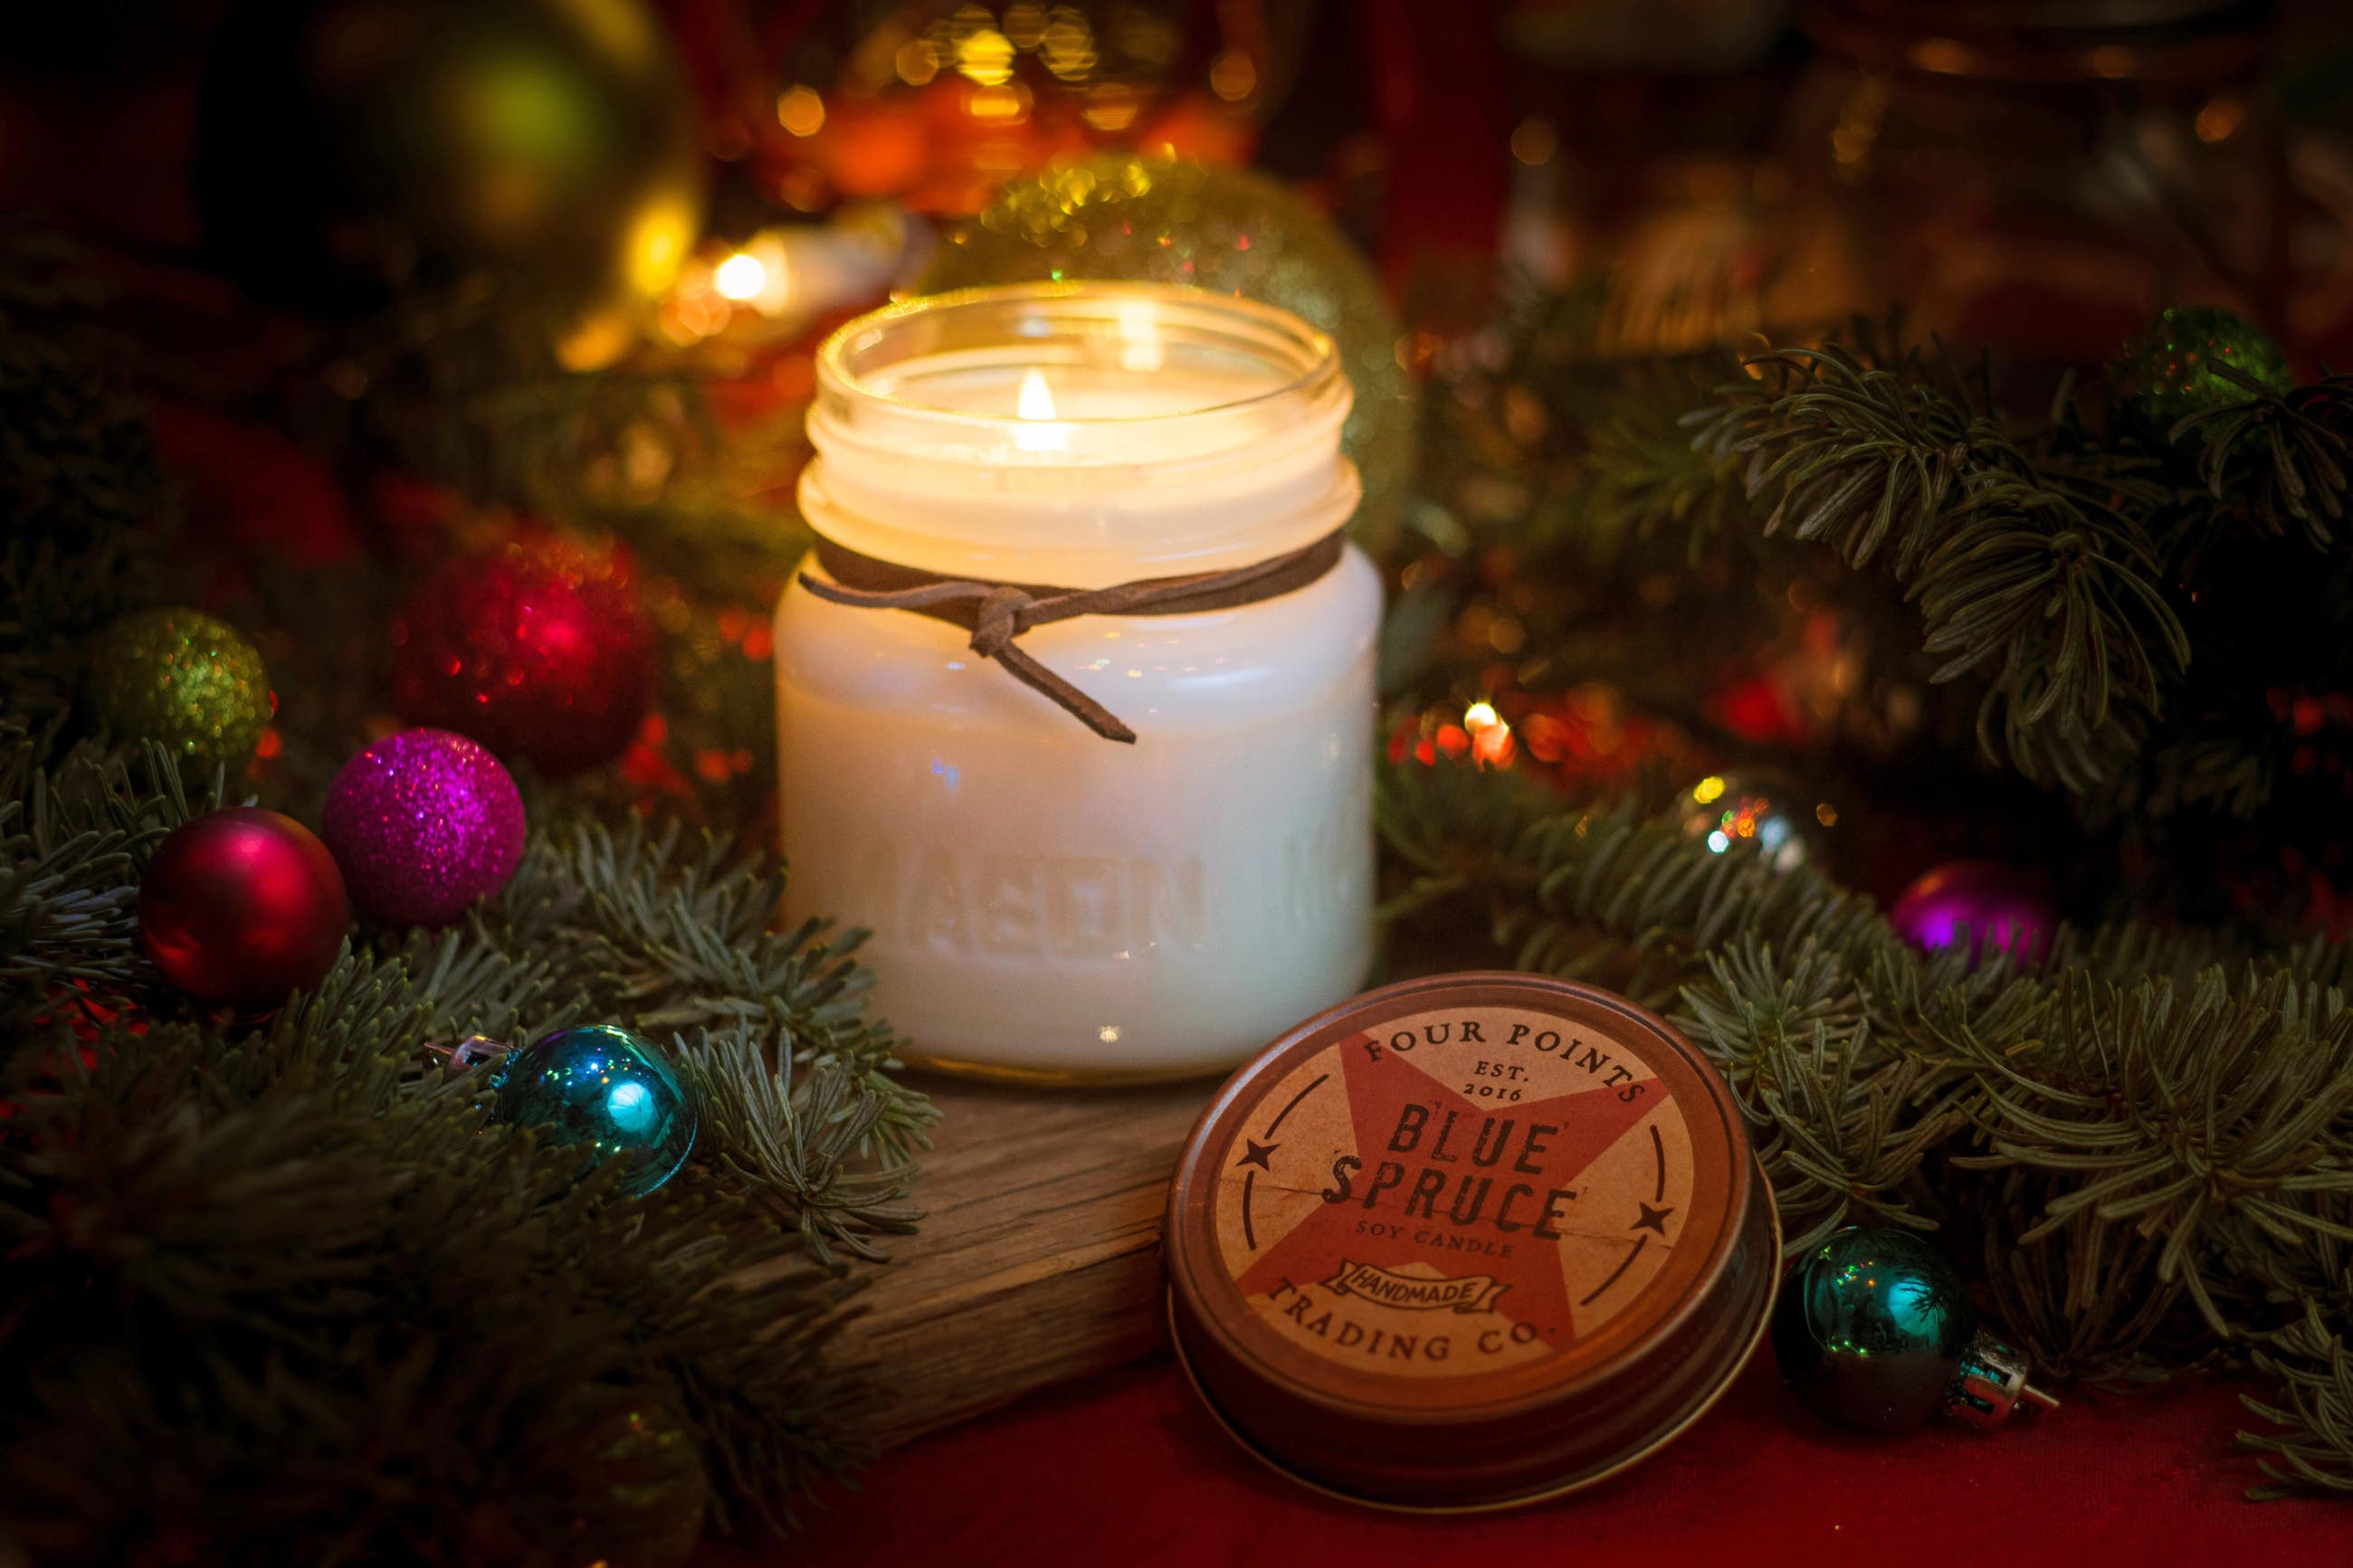 8oz Blue Spruce Holiday Candle | Photo: Four Points Trading Co.